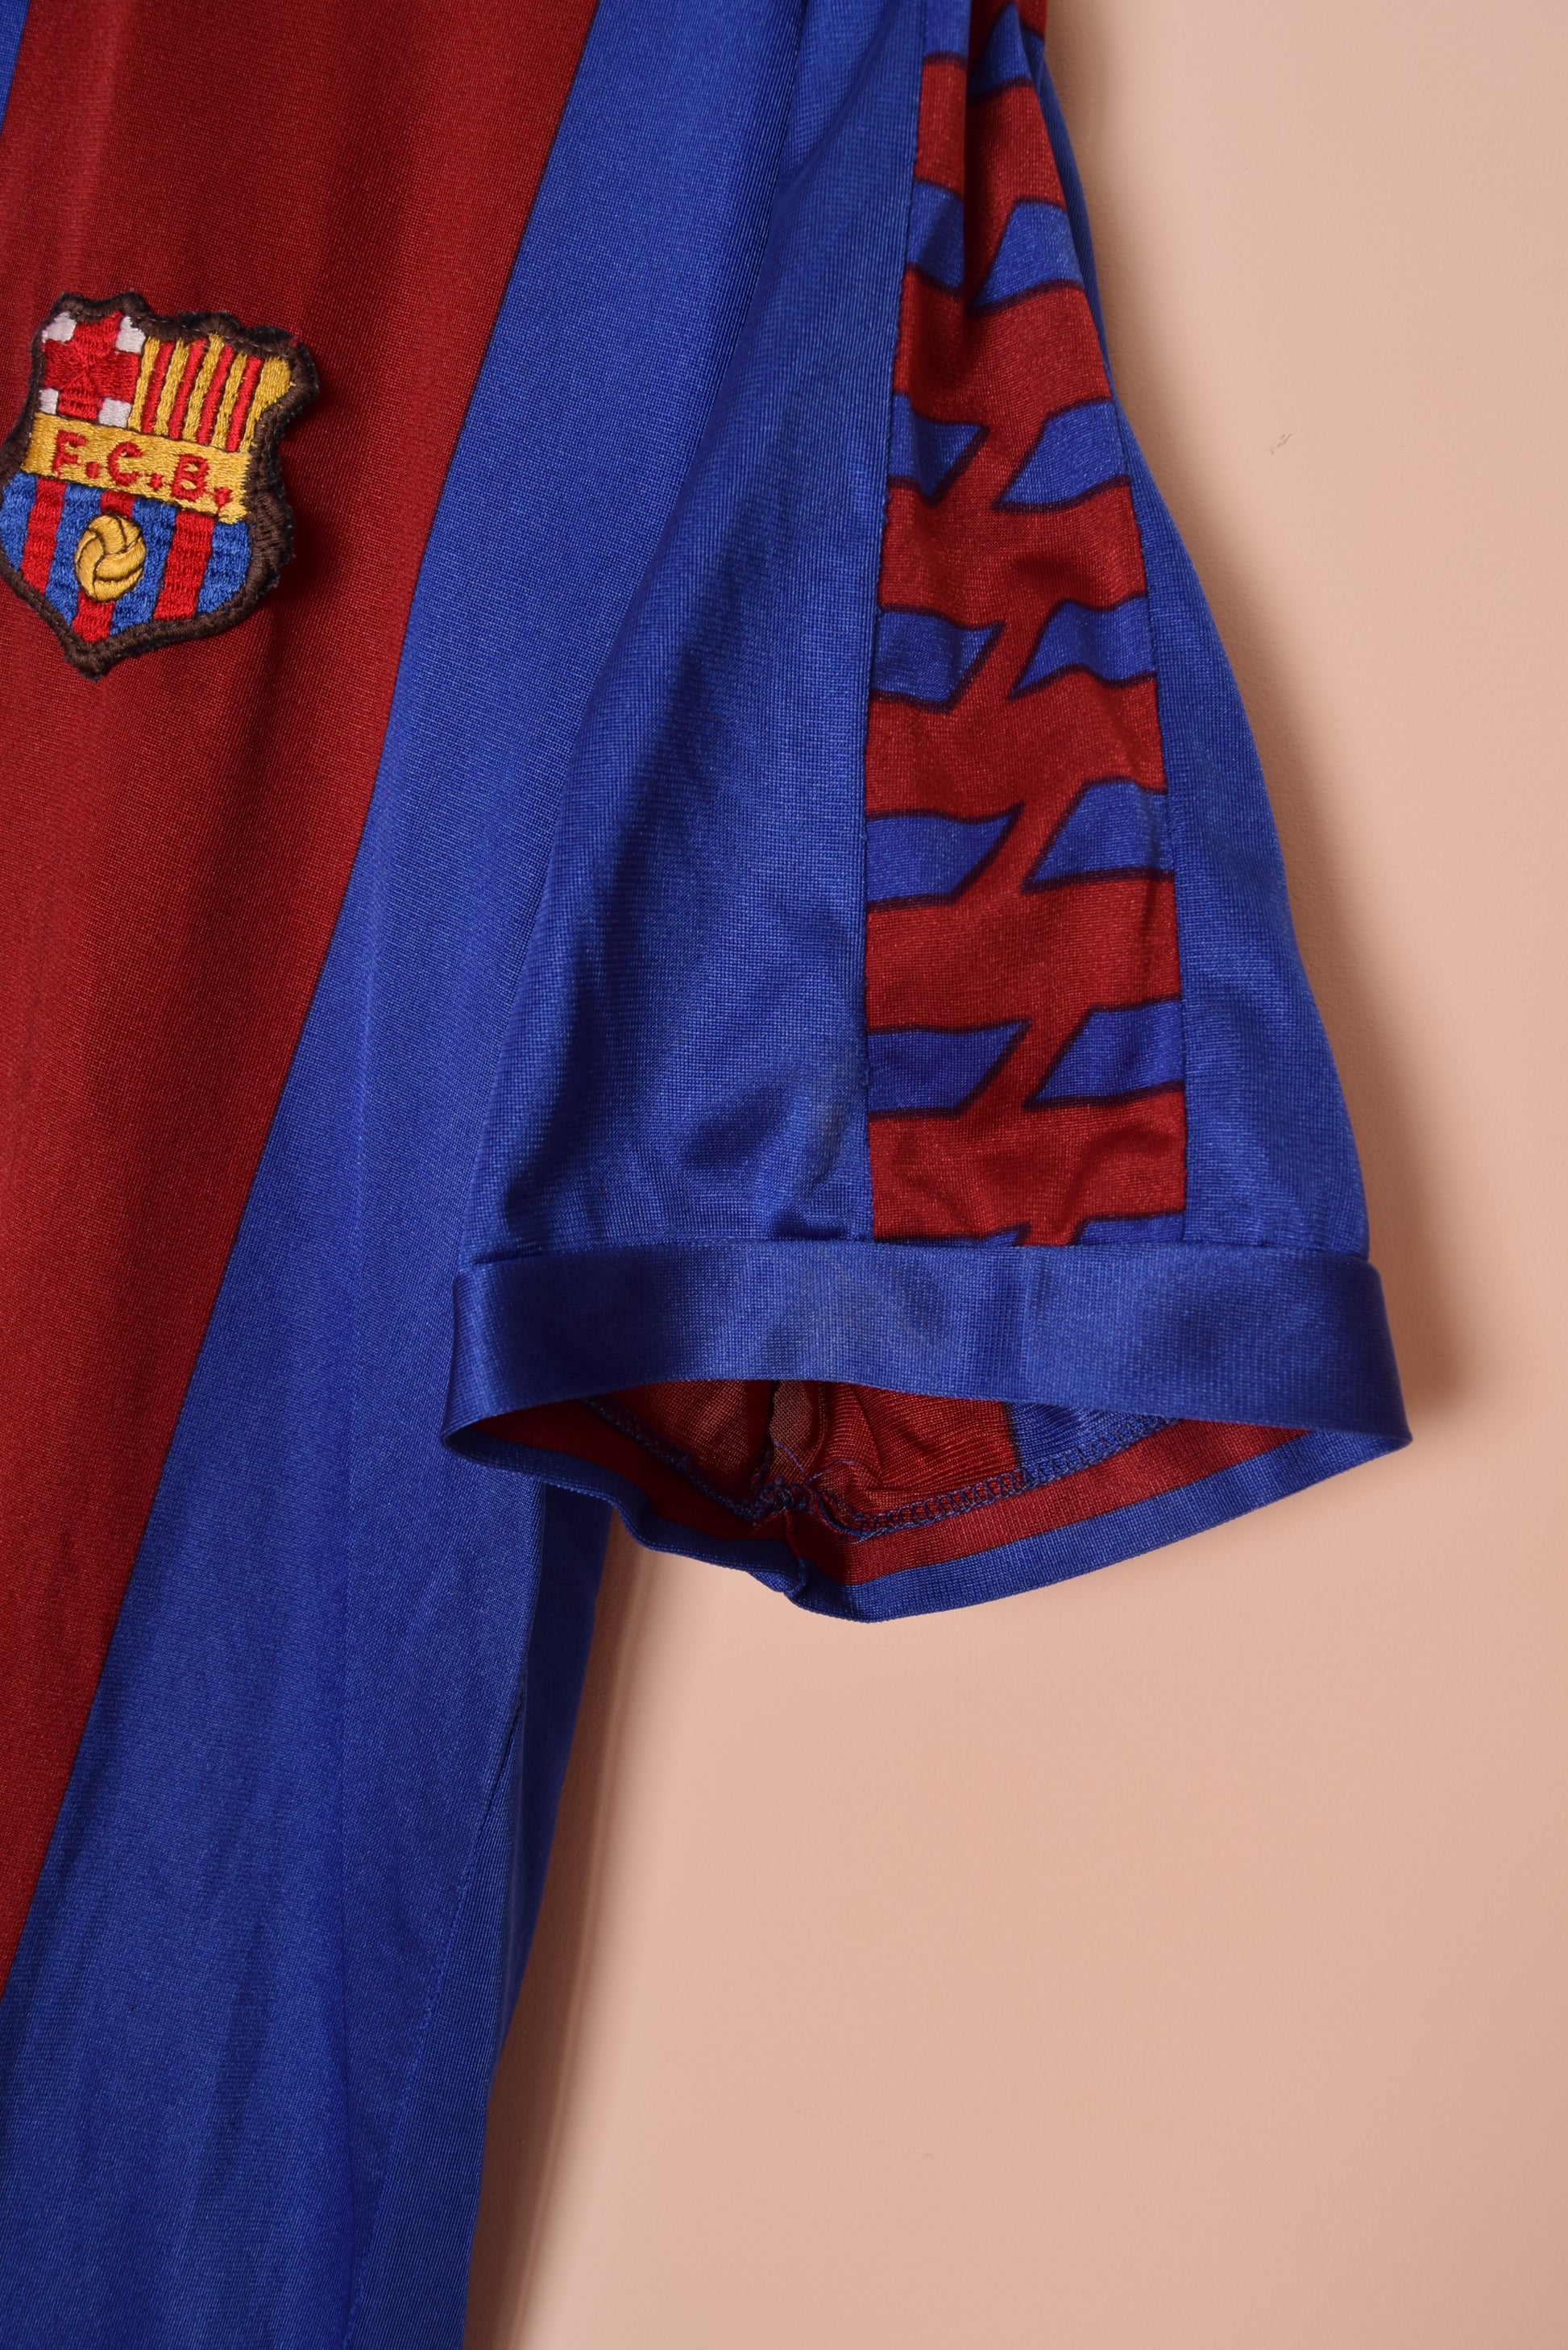 Vintage Meyba FC Barcelona Home Football Shirt / Jersey '84-89 Made in Spain Size M-L